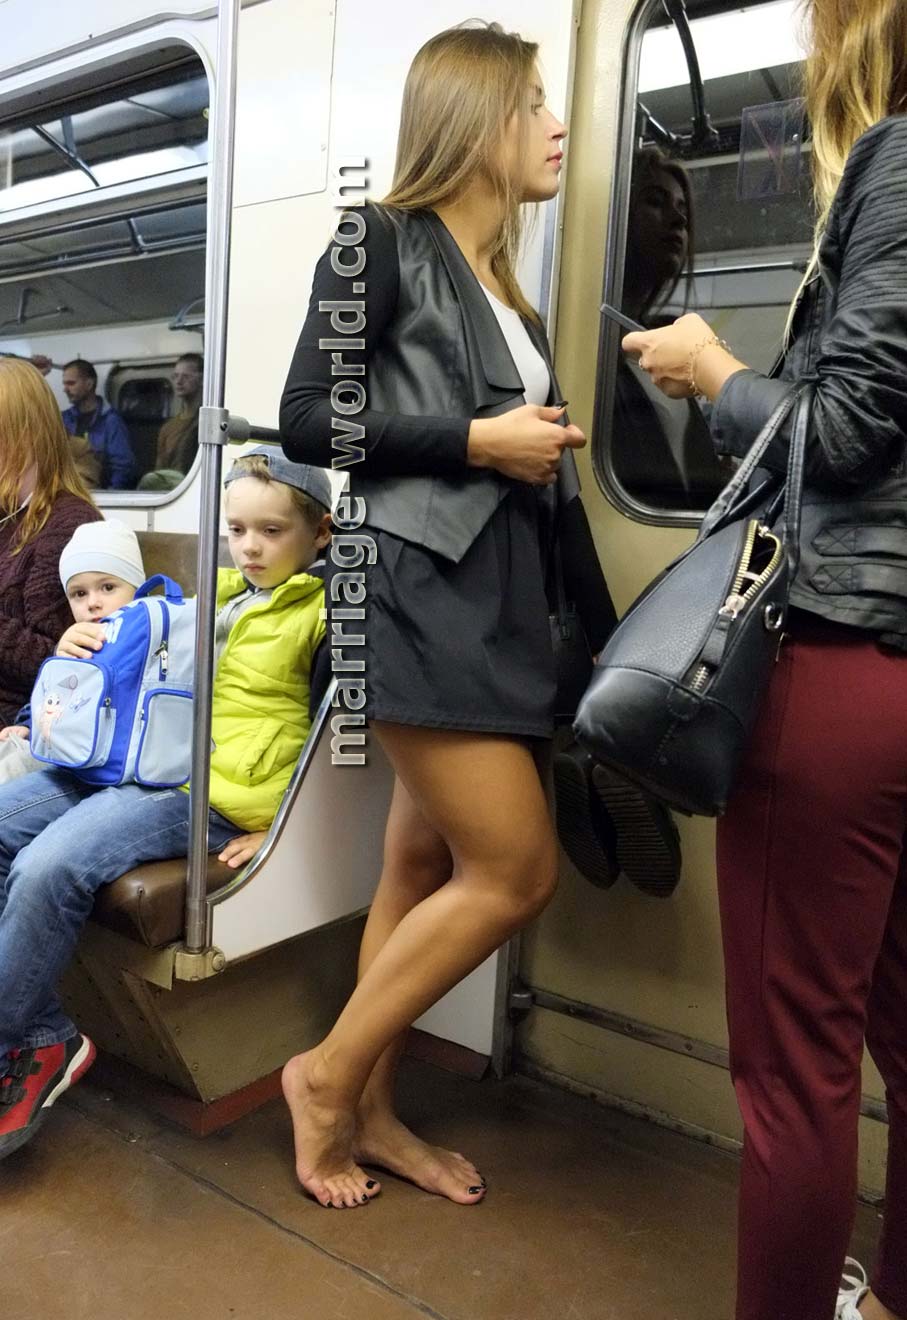 barefoot russian girl in moscow metro